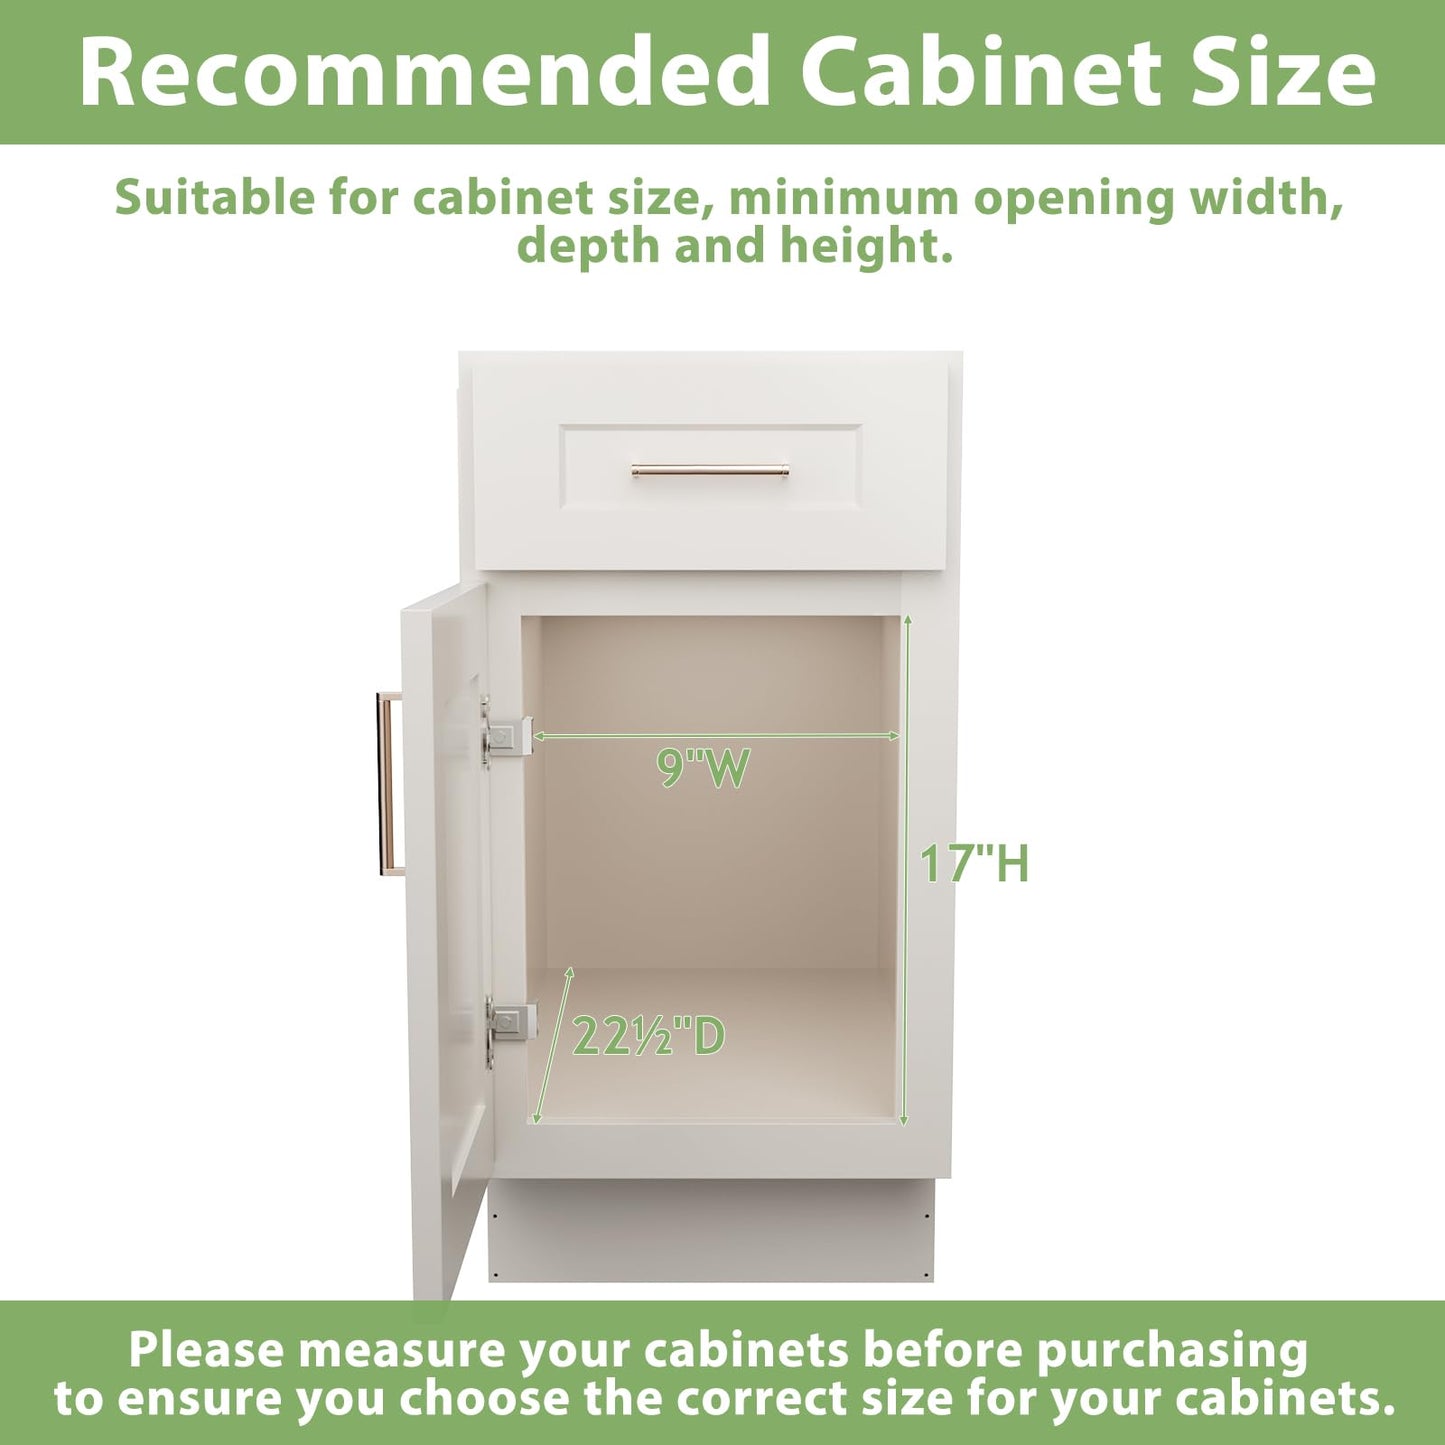 Pull Out Drawers For Kitchen Cabinets With Wooden Handle